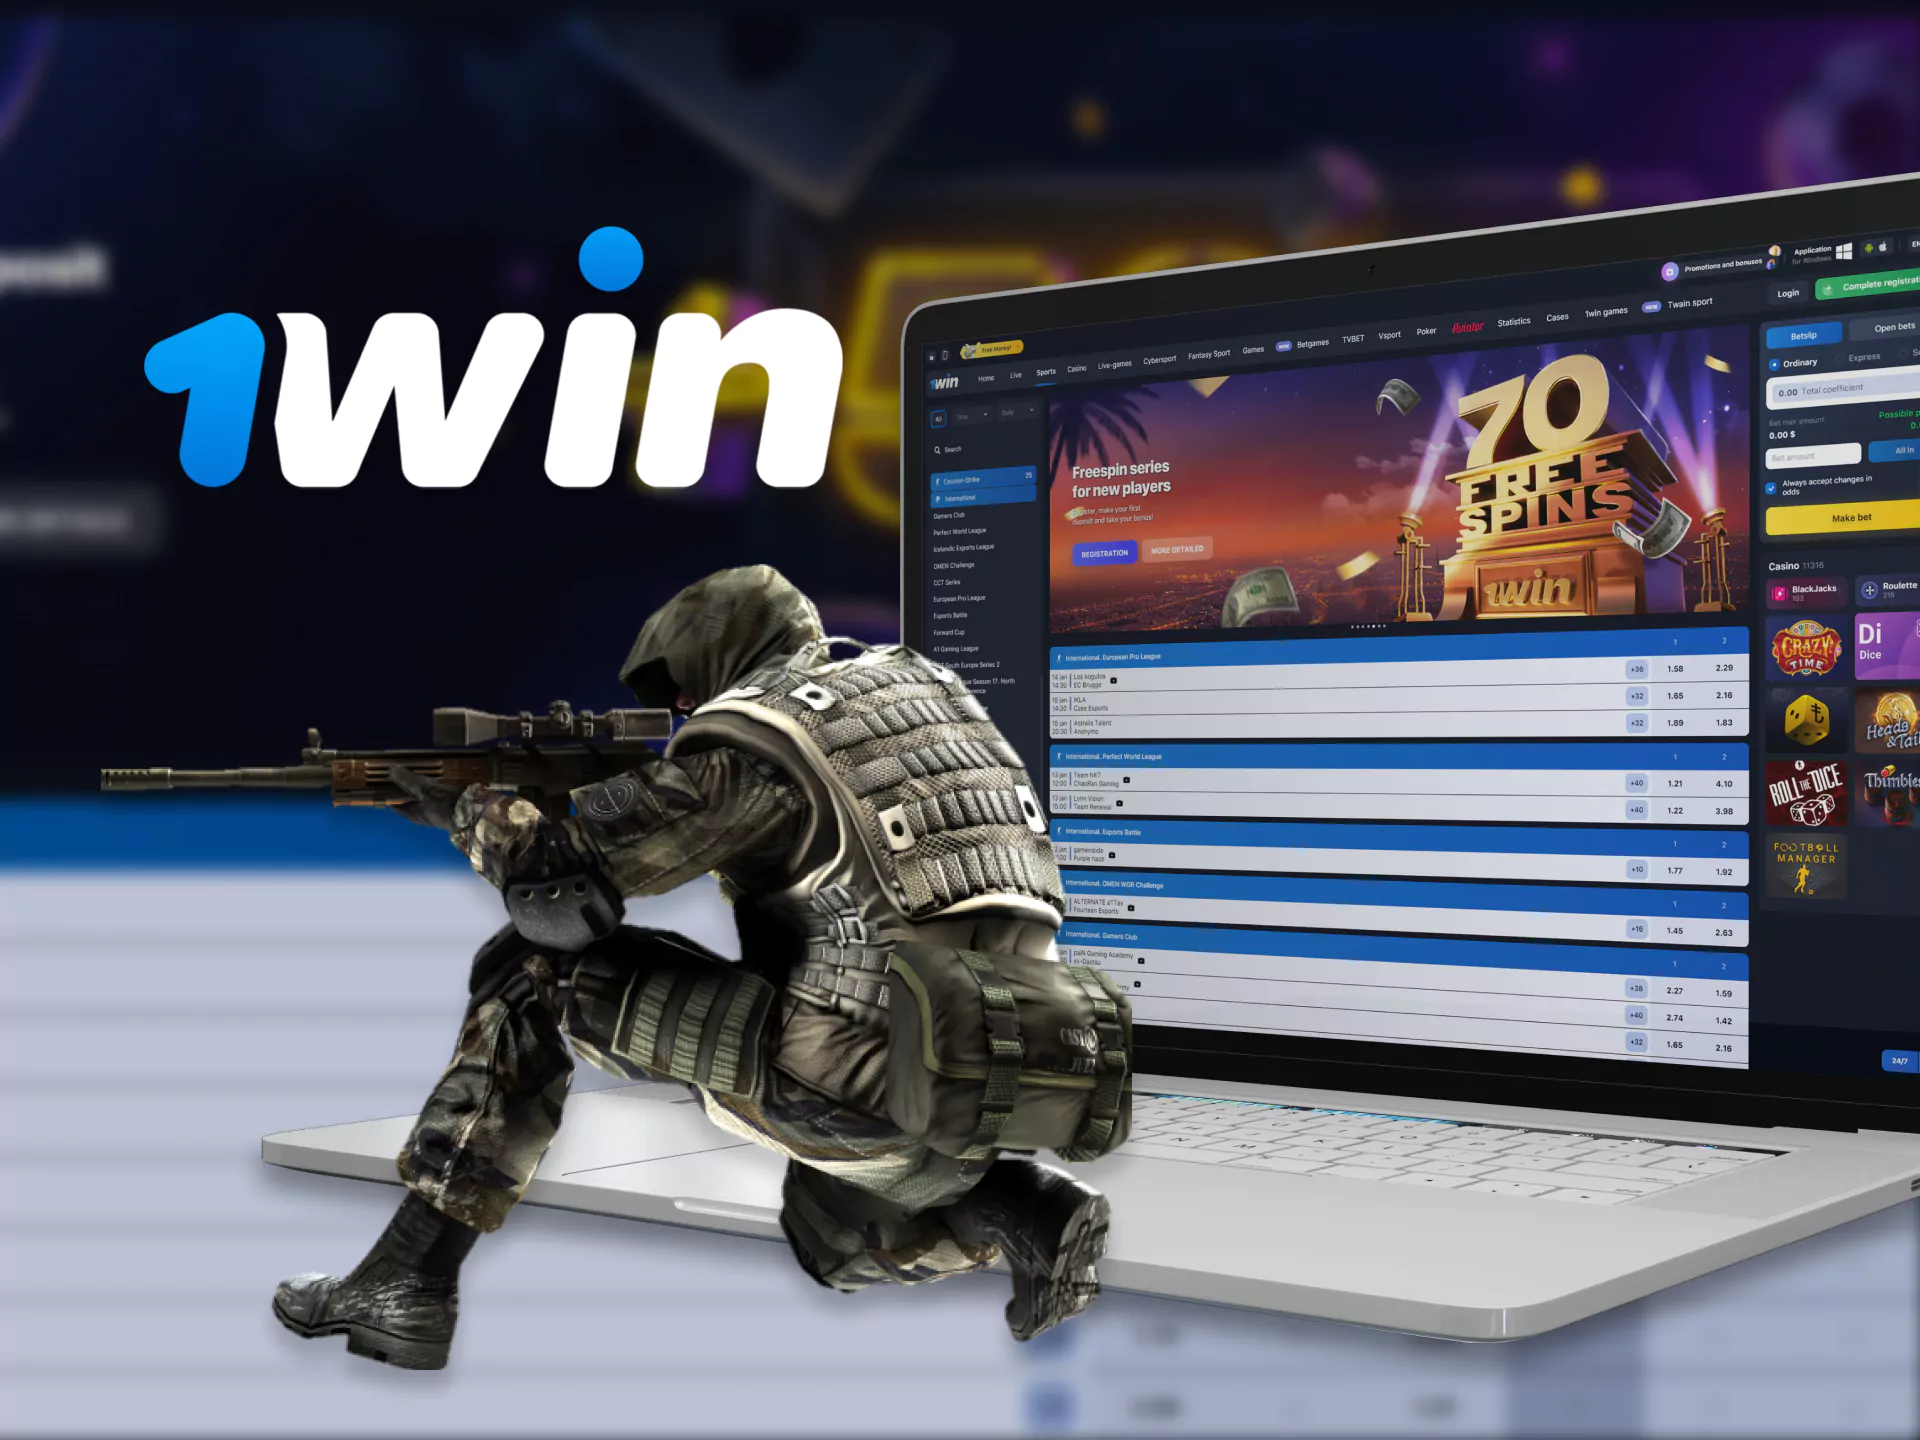 In 1Win, place your bet in the CS:GO tournament.